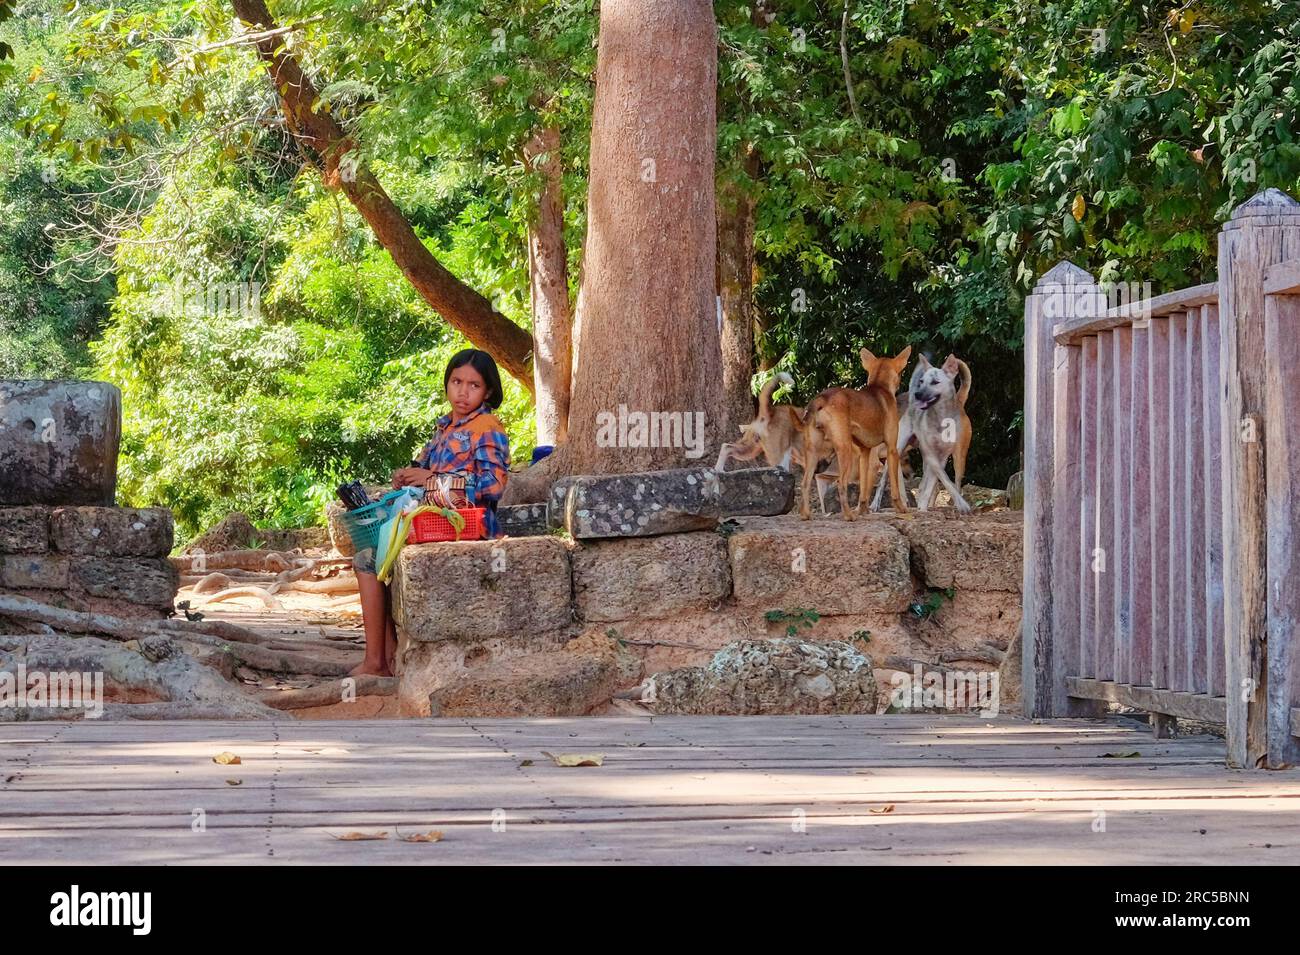 Siem Reap, Cambodia, December 19, 2018. Photograph depicting a young Khmer girl seated on old stone blocks, engaged in selling souvenirs. Stock Photo